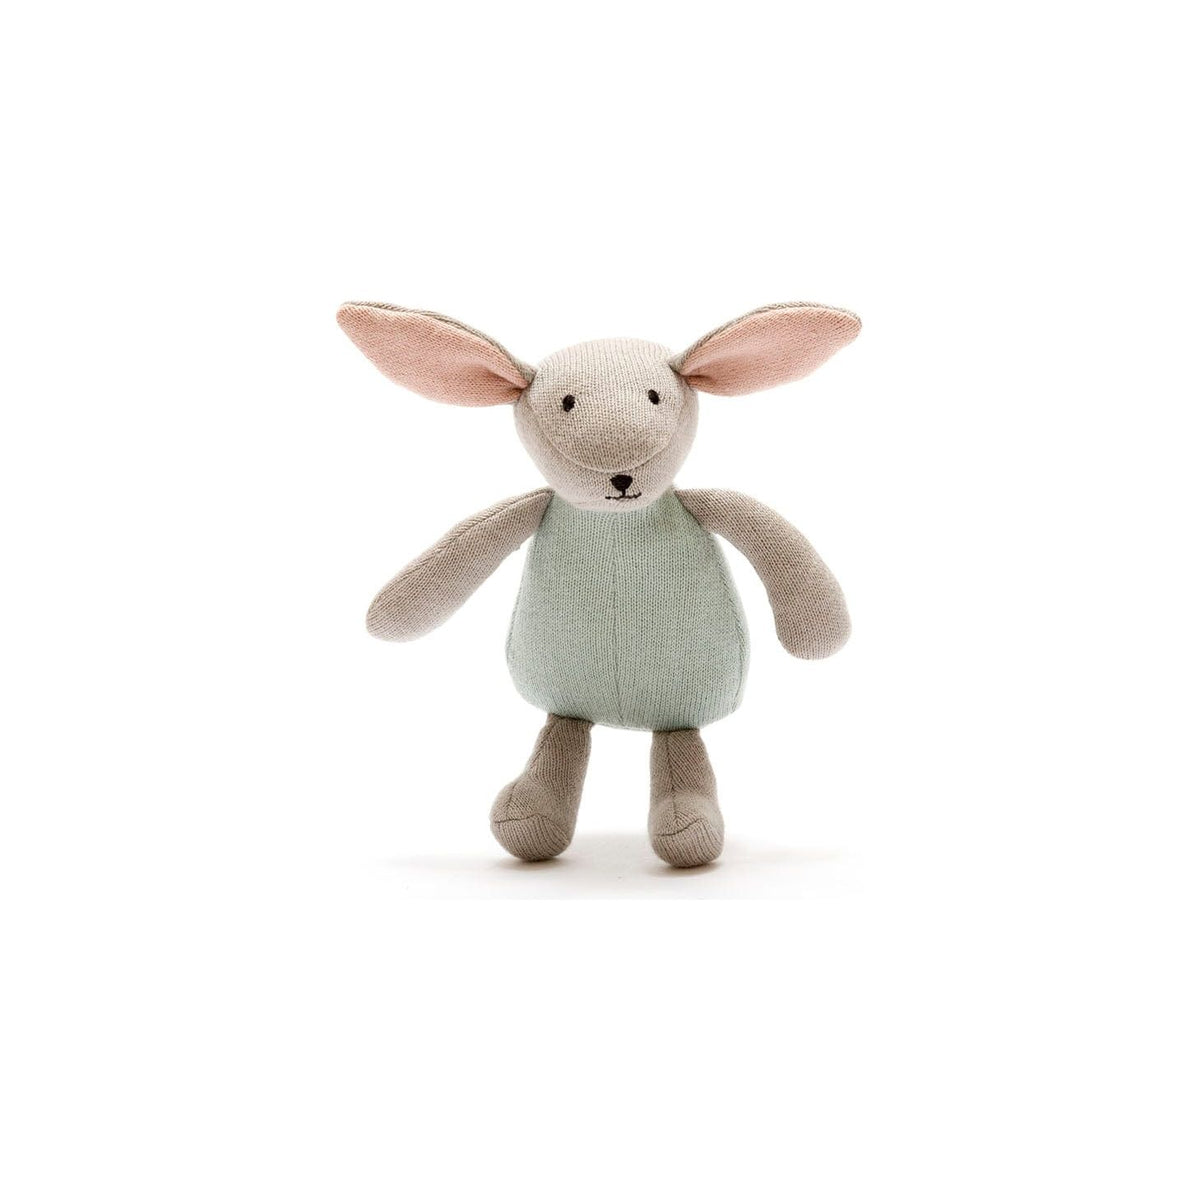 Best Years Ltd Organic Cotton Bunny Toy in Teal